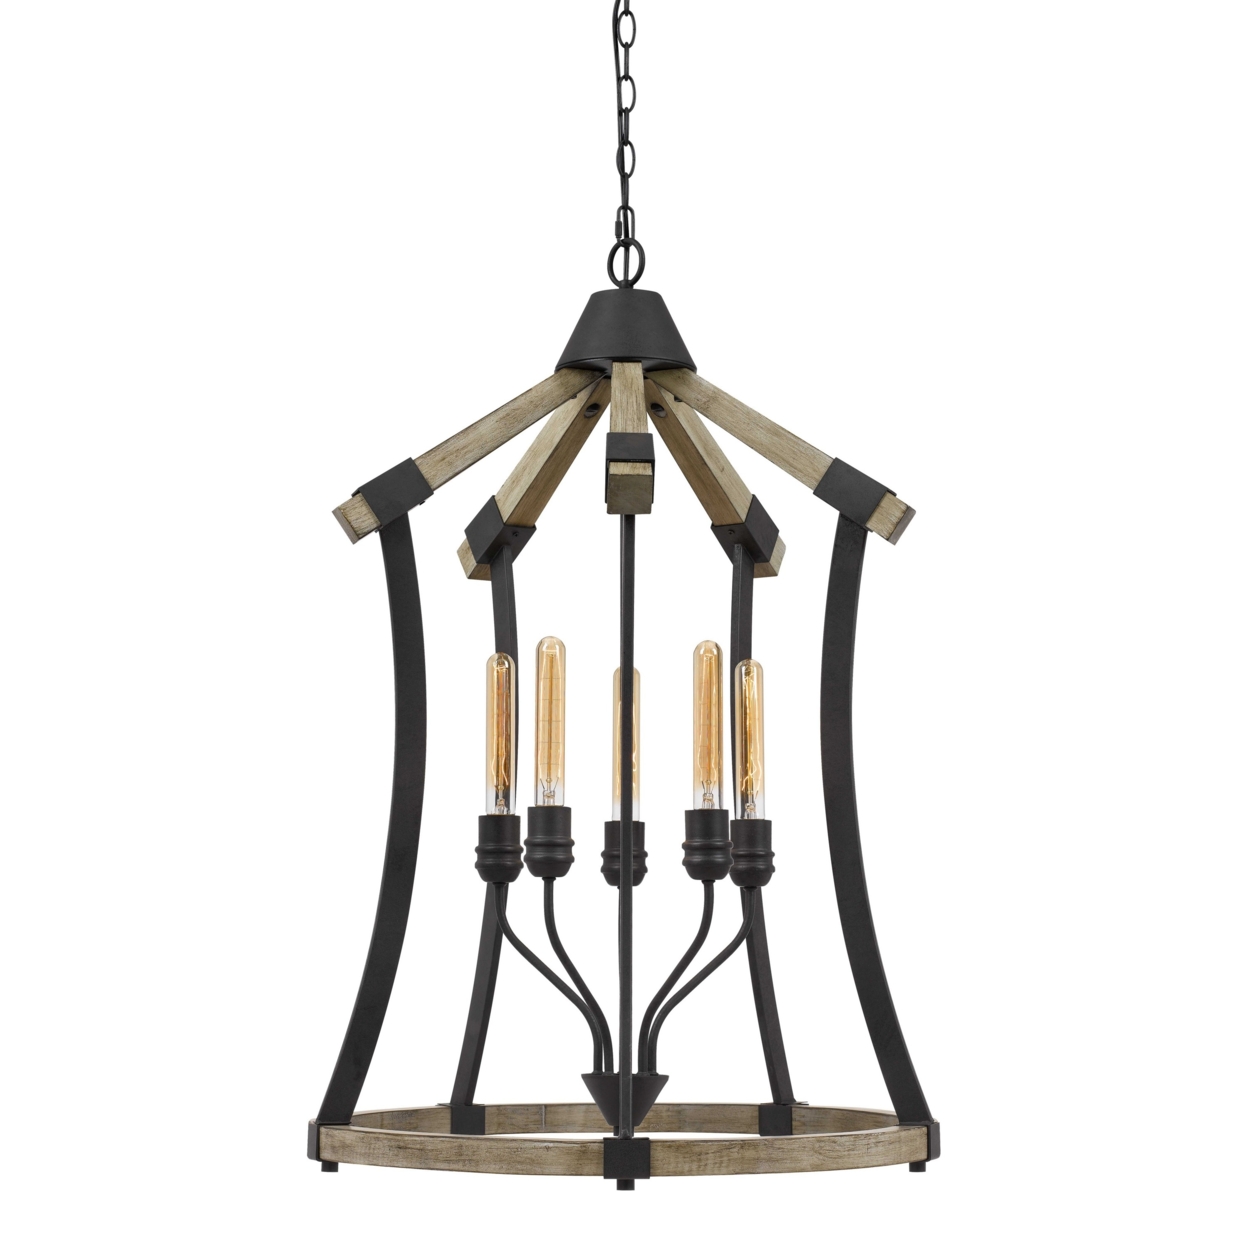 5 Bulb Pendant Fixture With Wooden And Metal Frame, Brown And Black- Saltoro Sherpi